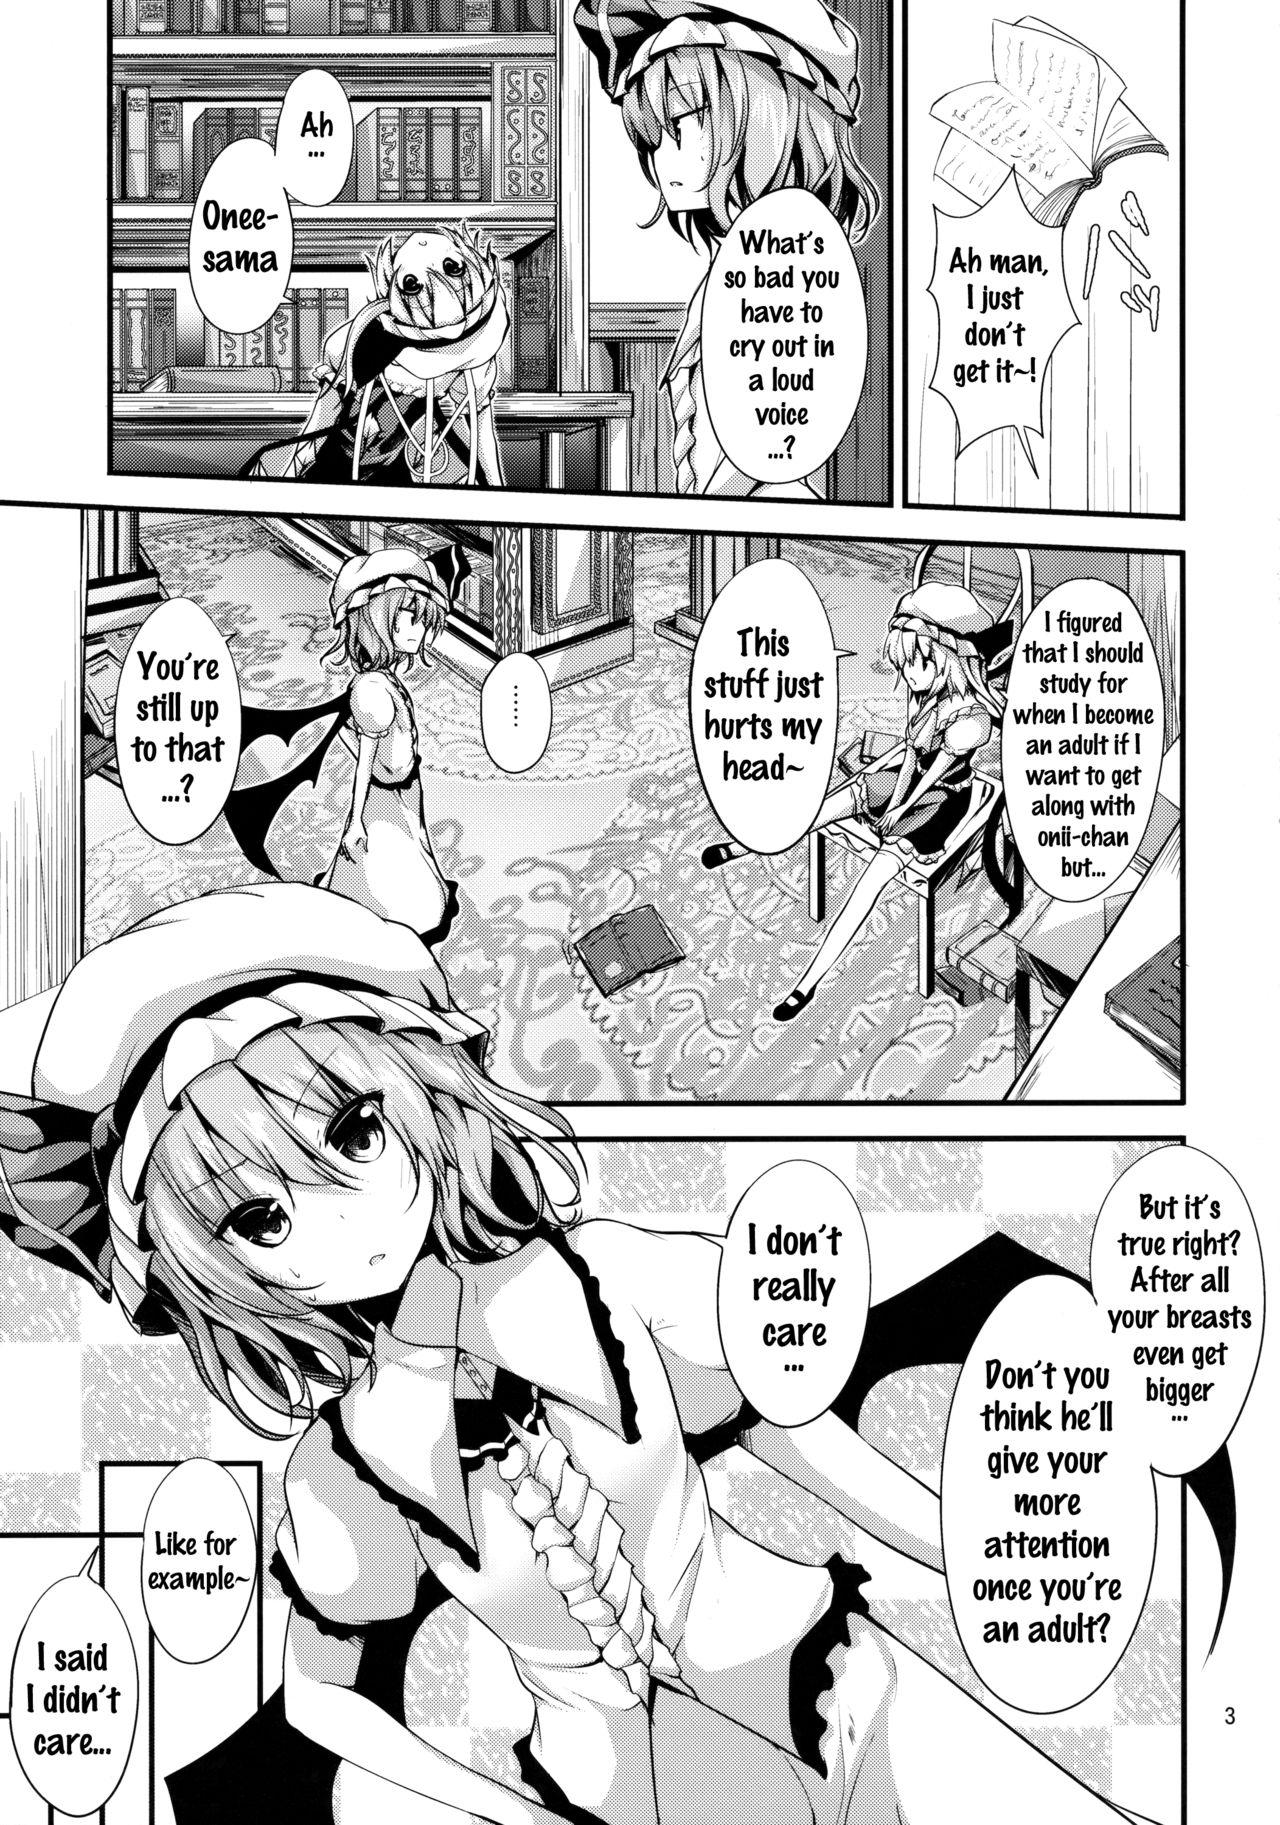 Yanks Featured Remi no Motto Otona ni Narumon! | Remi's Becoming More of An Adult! - Touhou project Insertion - Page 2